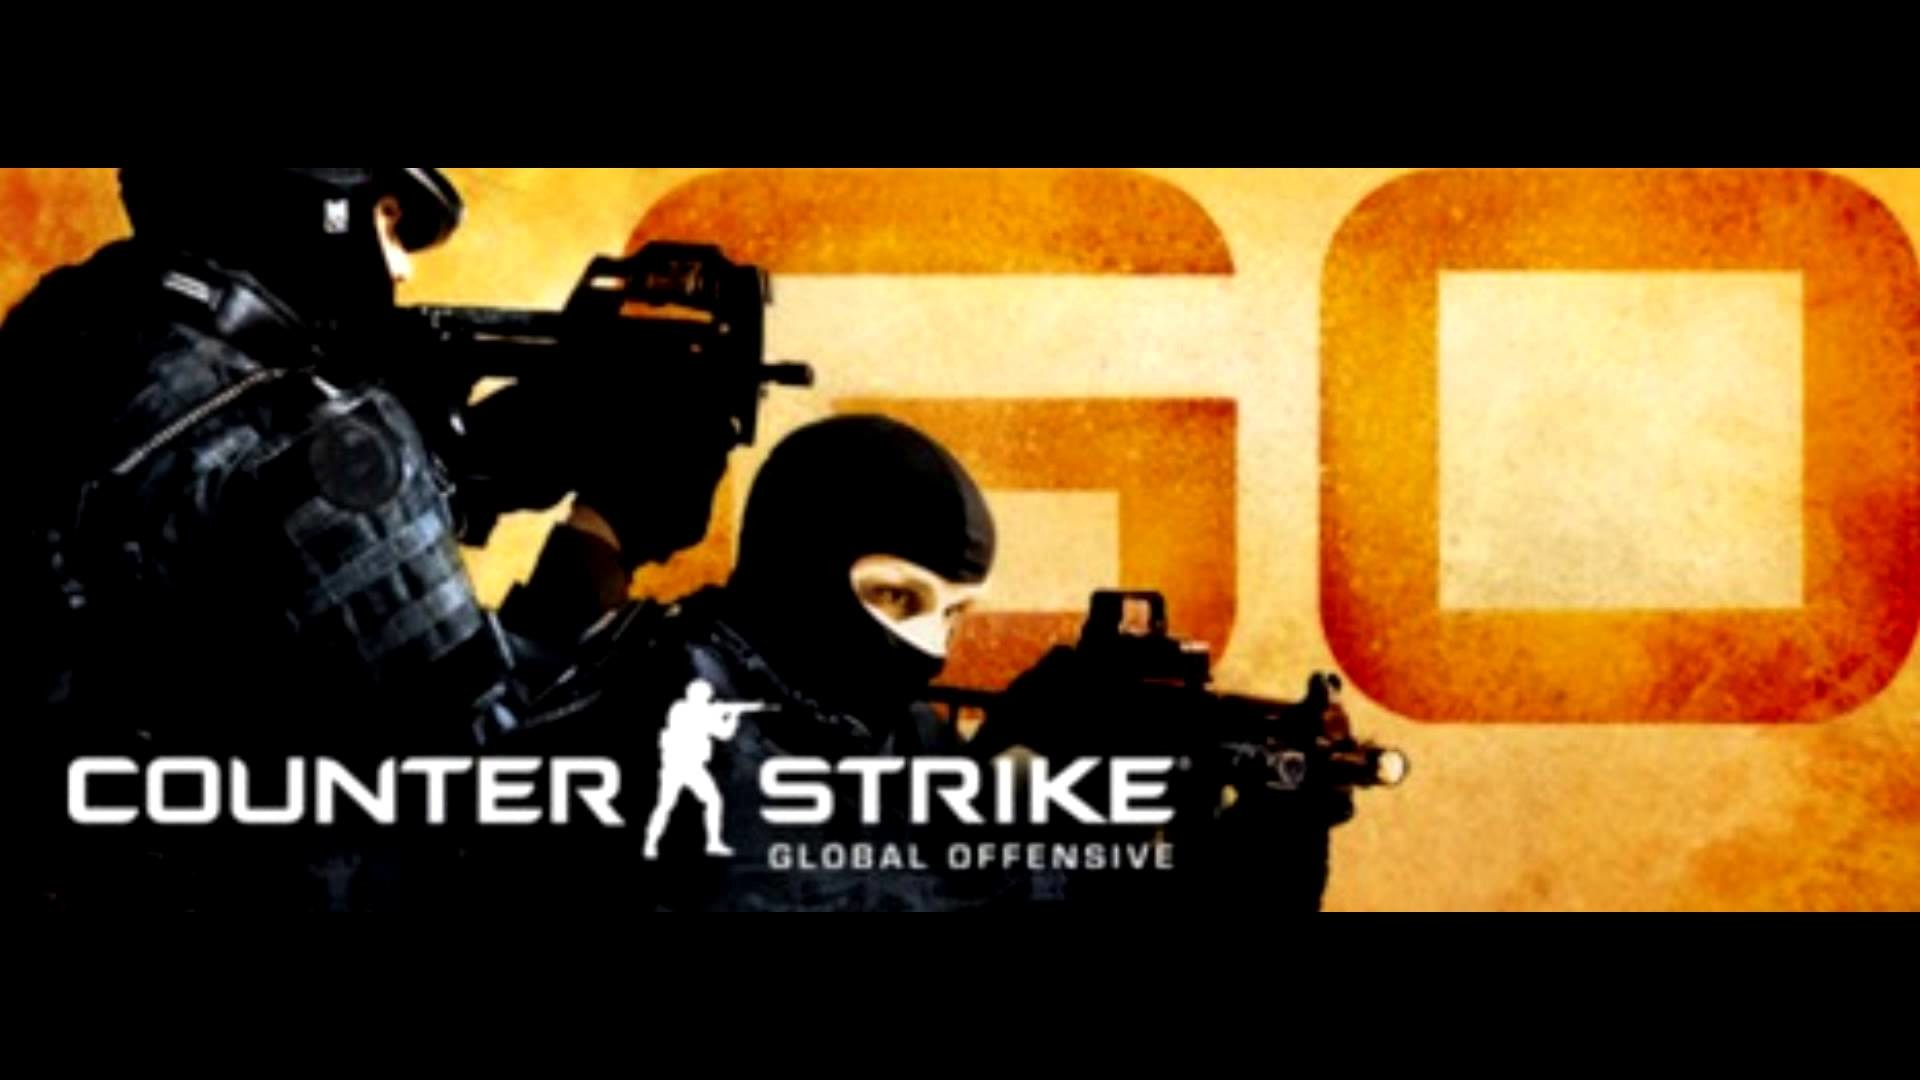 1920x1080 Counter Strike Global Offensive Poster Wallpapers Hd Is Cool Wallpapers